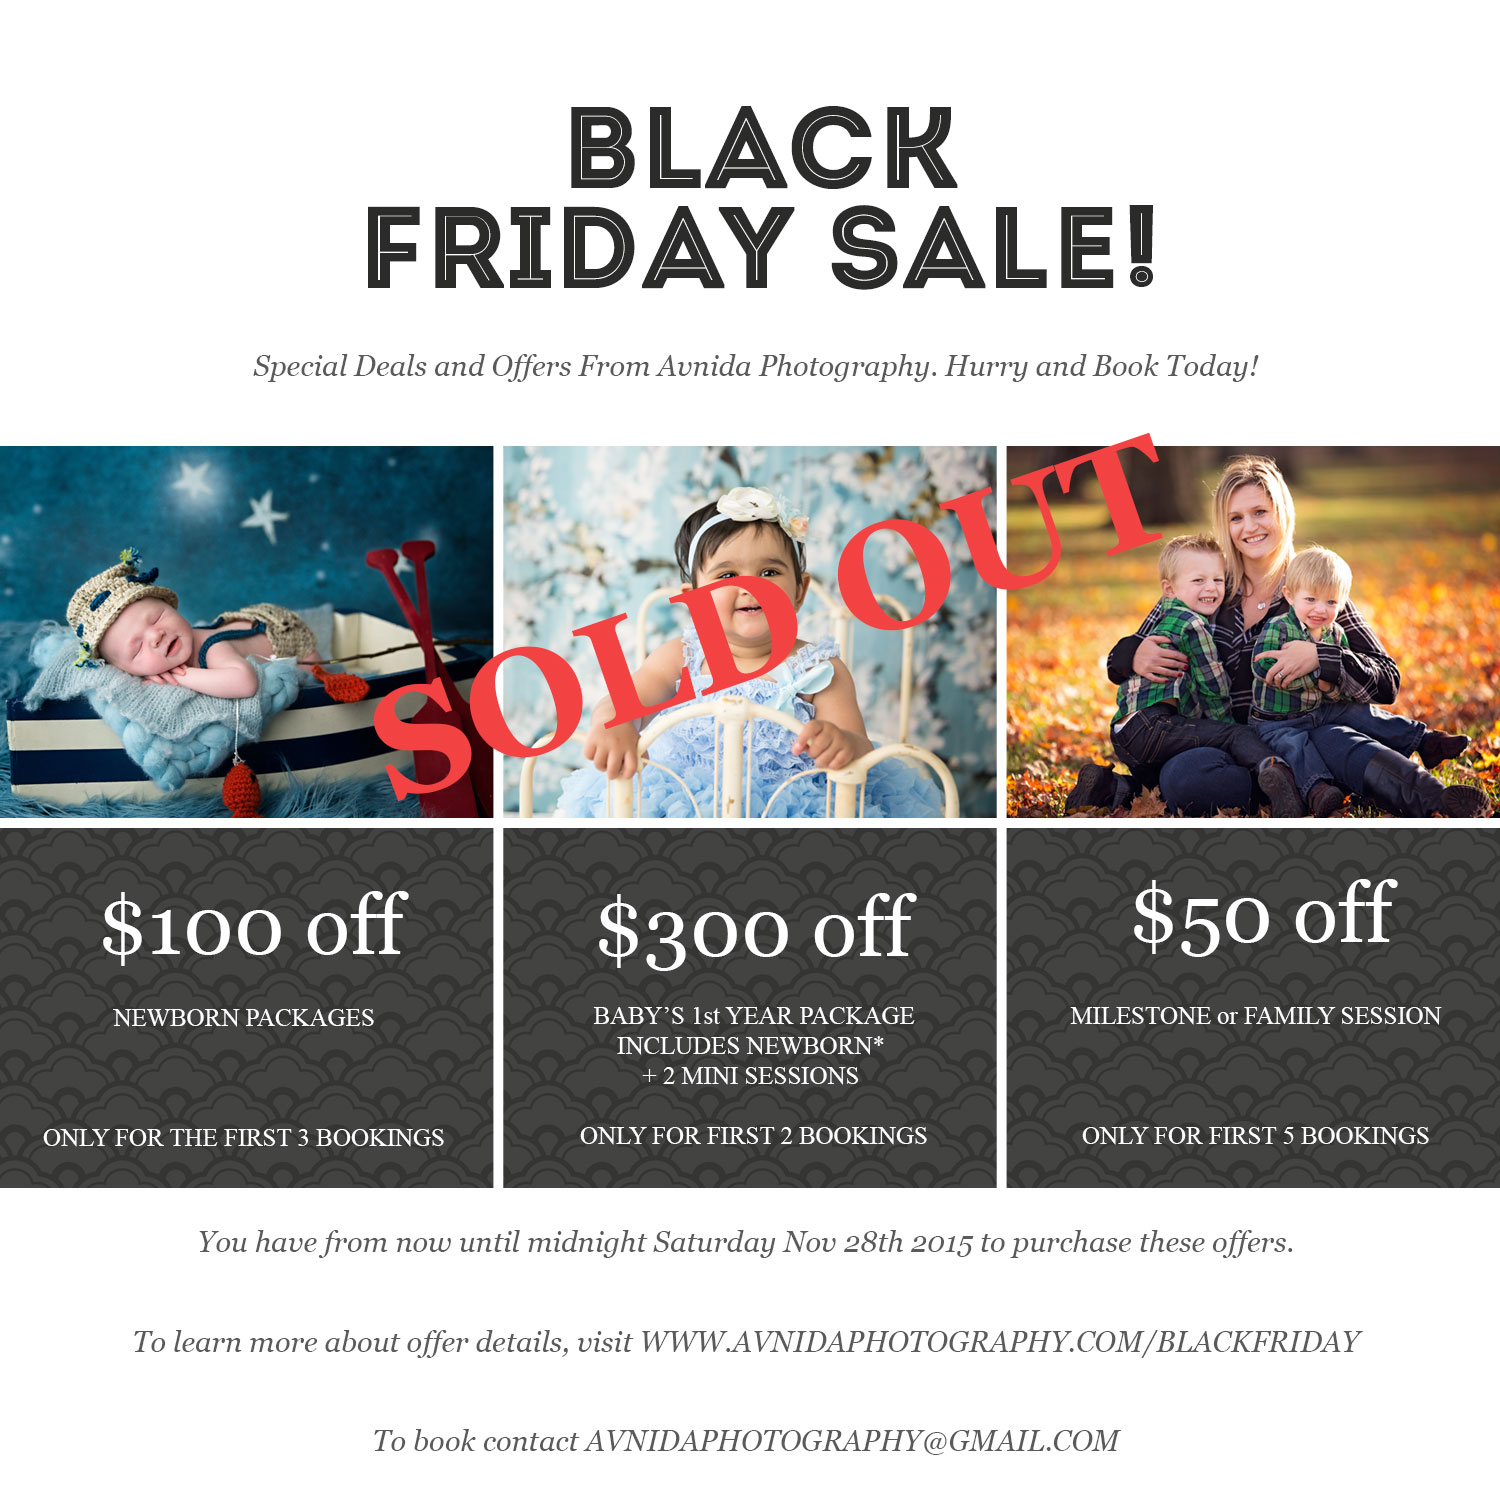 BLACK FRIDAY SALE! Up to $300 Off for Photo Sessions! - When Does Black Friday Deal Generally End